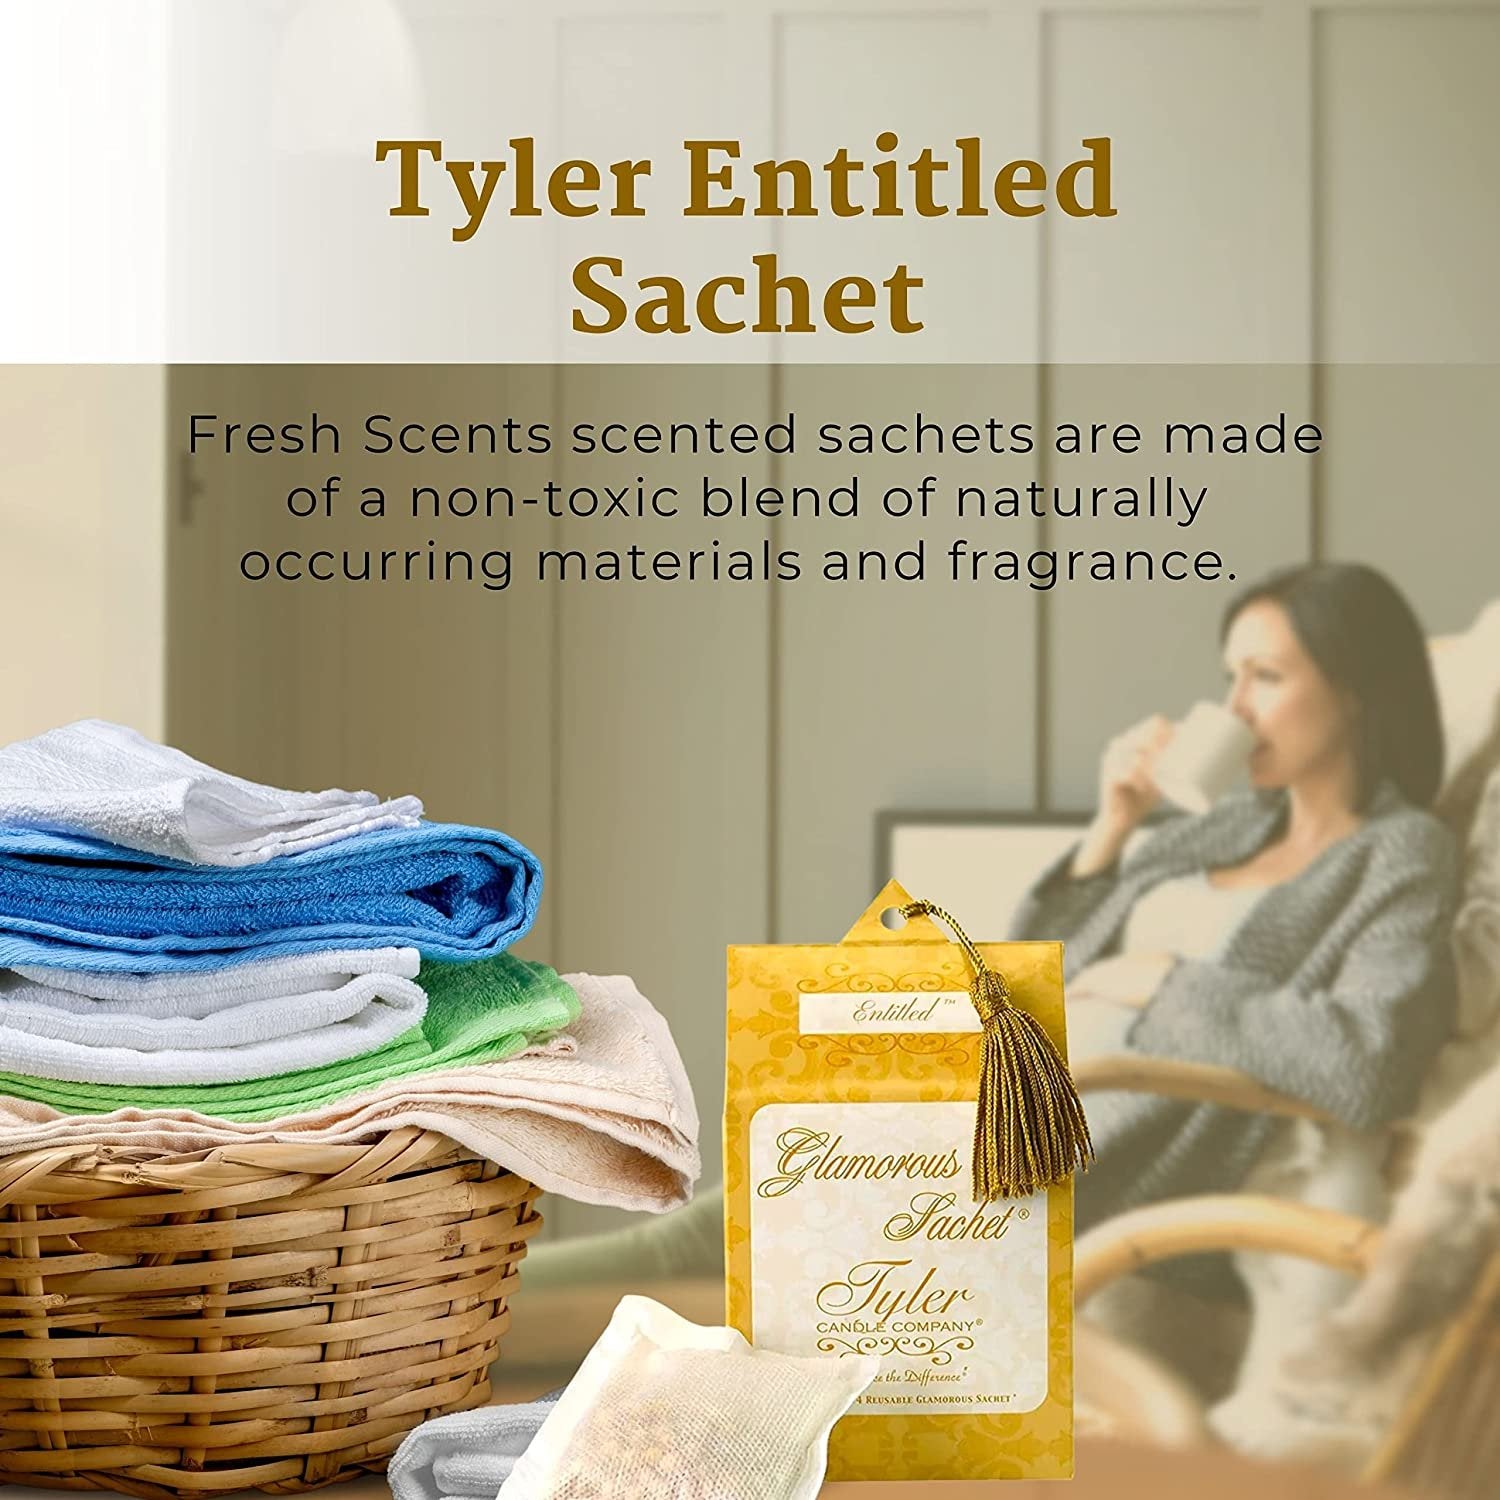 Tyler Candle Company Entitled Dryer Sheet Sachets - Glamorous Reusable Dryer Sheets - Sachets for Drawers and Closets - 1 Pack, 4 Sachets, Dryer, Home, or Personal Sachet, with Bonus Key Chain